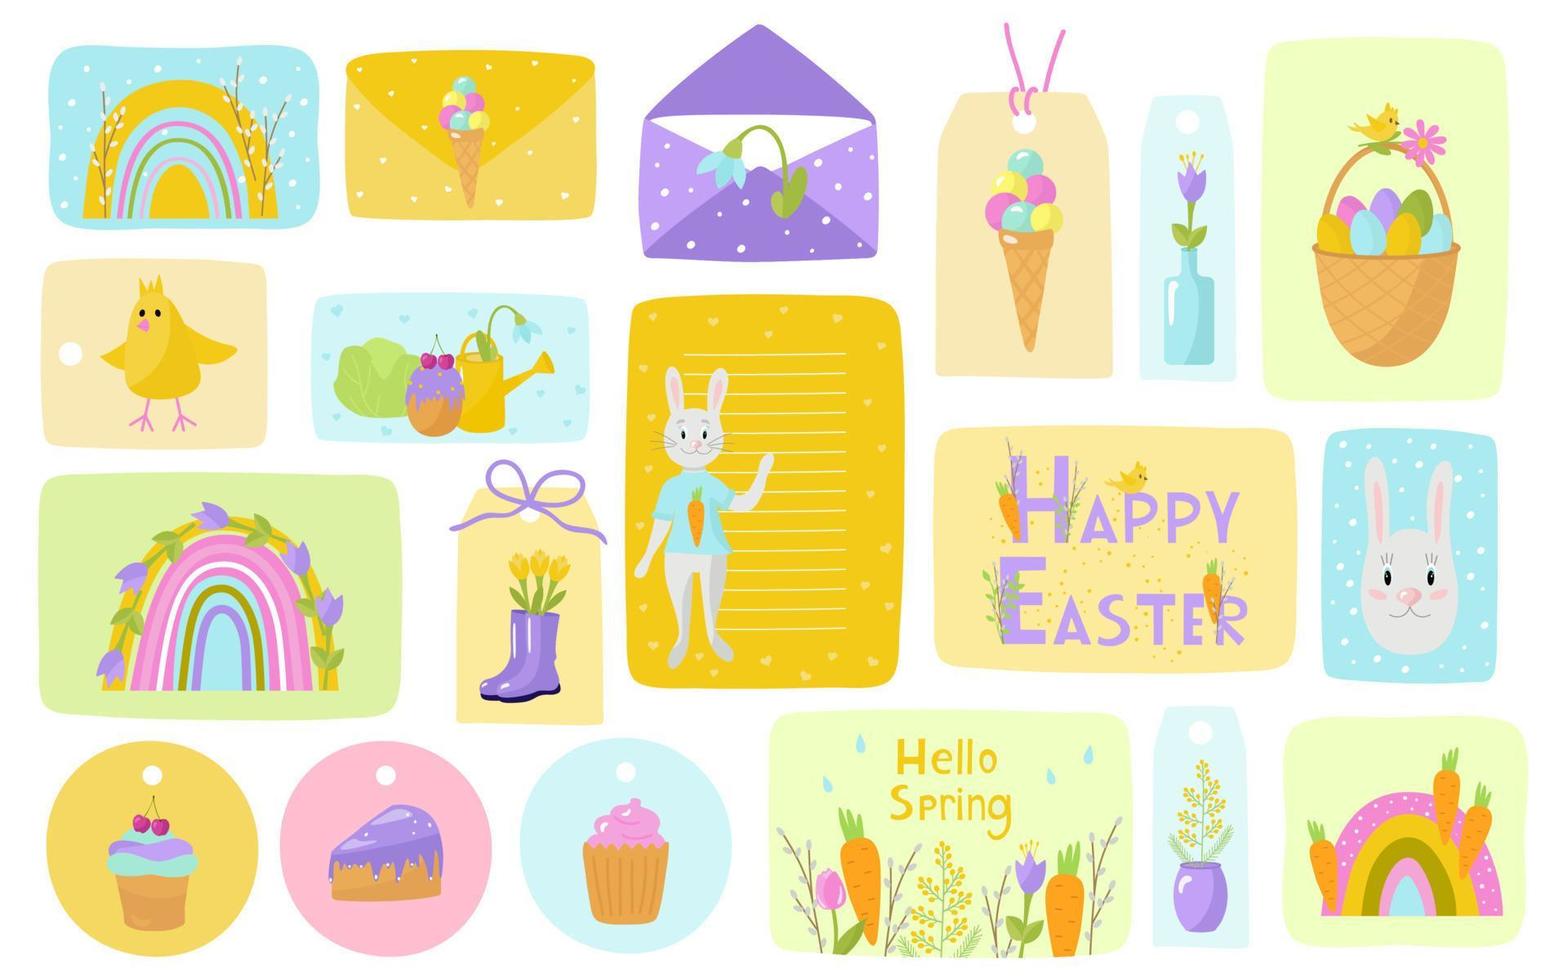 Tags and labels, envelopes spring Happy Easter. With rabbits, chickens, rainbows, ice cream, rubber boots, cake. Design for children, postcards, printing on paper or fabric. vector